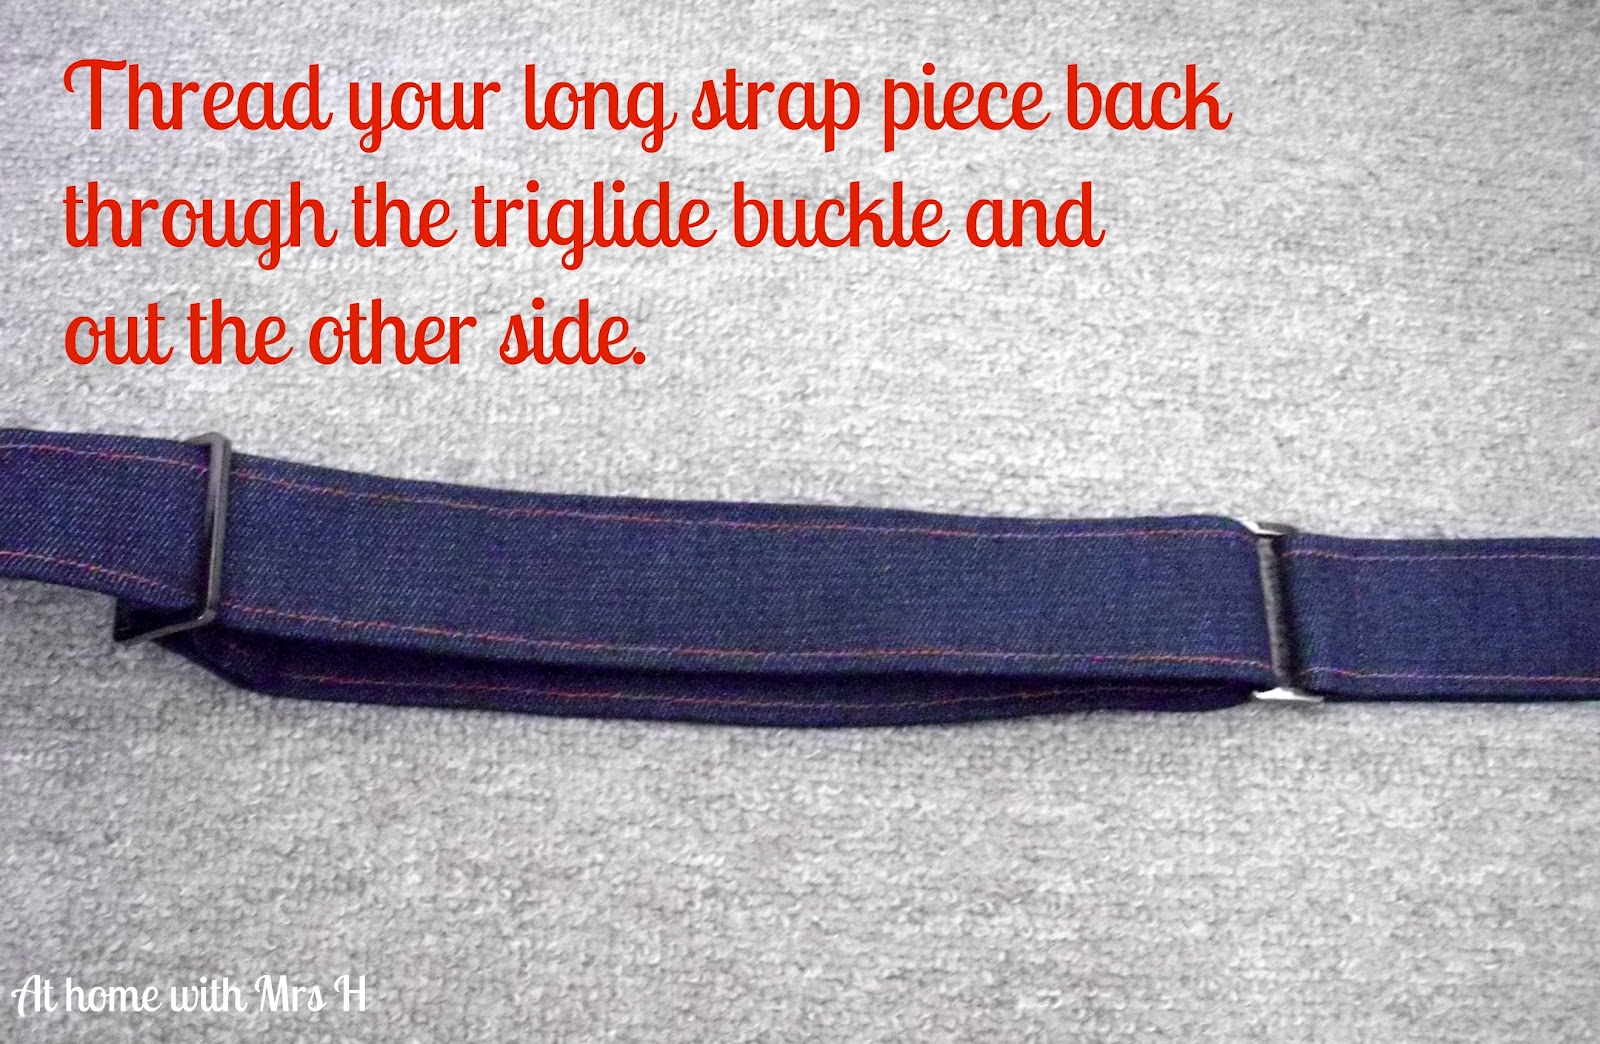 How To Make An Adjustable Strap - For Any Bag! - AppleGreen Cottage